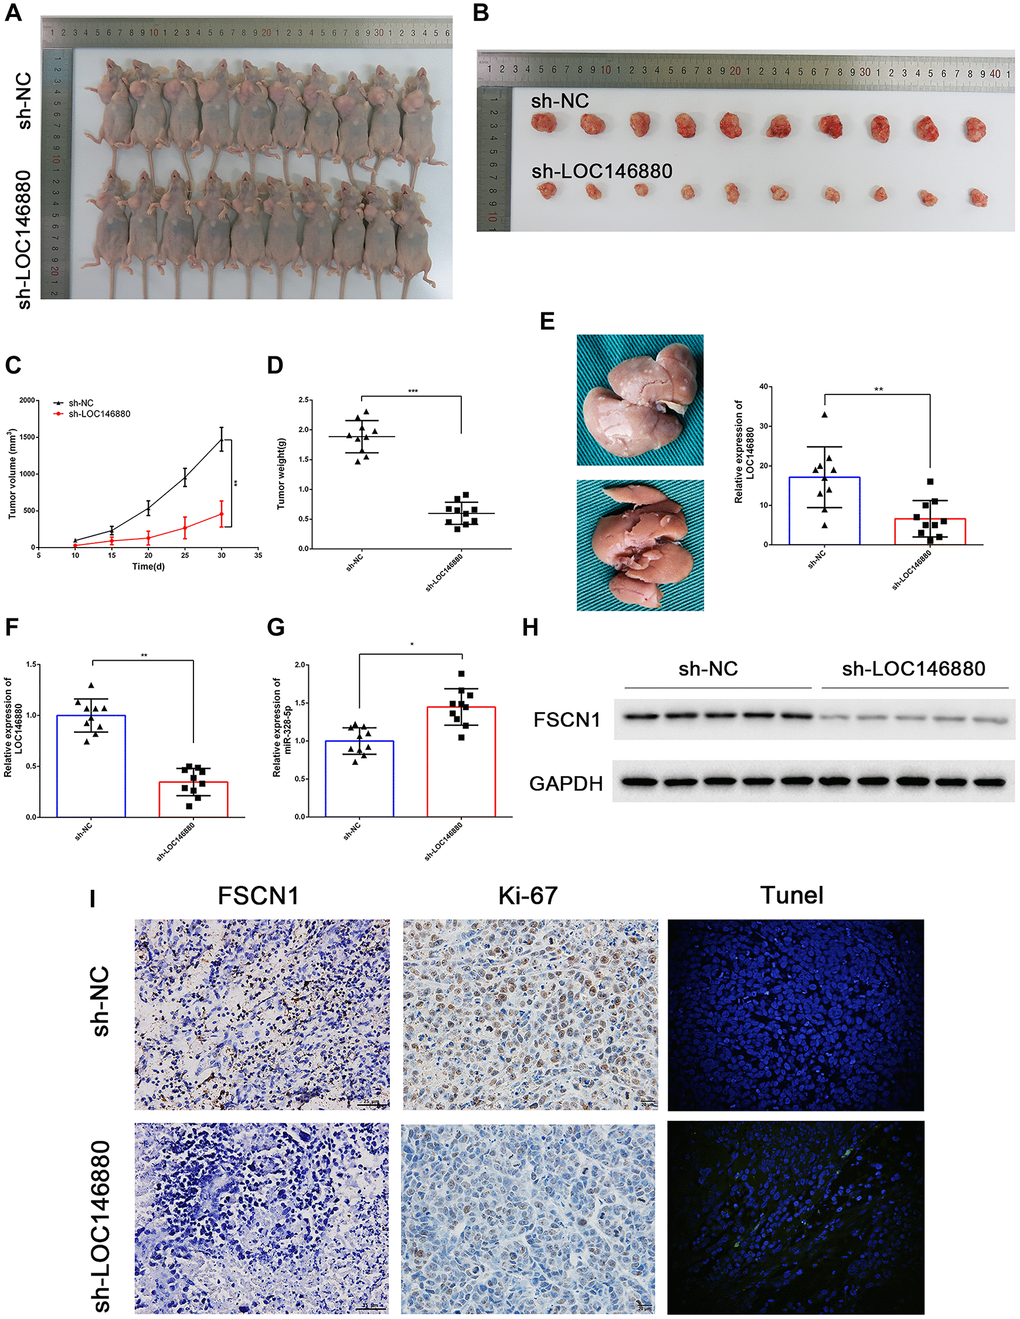 LOC146880 silencing reduces in vivo ESCC growth and progression. (A) Representative images show nude mice xenografted with sh-NC-transfected Kyse30 cells (upper, n = 10) and sh-LOC146880-transfected Kyse30 cells (lower, n = 10). (B) Representative images show ESCC-derived tumor xenografts from nude mice injected with sh-NC-transfected Kyse30 cells (upper) and sh-LOC146880-transfected Kyse30 cells (lower). (C) Tumor volumes of sh-NC and sh-LOC146880 groups of ESCC xenograft tumors in nude mice. (D) Tumor mass of sh-NC and sh-LOC146880 groups of ESCC xenograft tumors in nude mice. (E) Representative images and quantitative analysis show the number of metastatic tumor nodules in the liver of nude mice belonging to sh-NC and sh-LOC146880 groups. (F–G) QRT-PCR analysis of (F) LOC146880 and (G) miR-328-5p expression levels in xenograft tumors from sh-NC and sh-LOC146880 groups. (H) Western blot analysis shows FSCN1 protein levels in xenograft tumors from sh-NC and sh-LOC146880 groups. (I) Immunohistochemical staining and Tunel Staining show3 expression levels of FSCN1, Ki-67 and apoptotic cells in xenograft tumor sections from sh-NC and sh-LOC146880 groups.